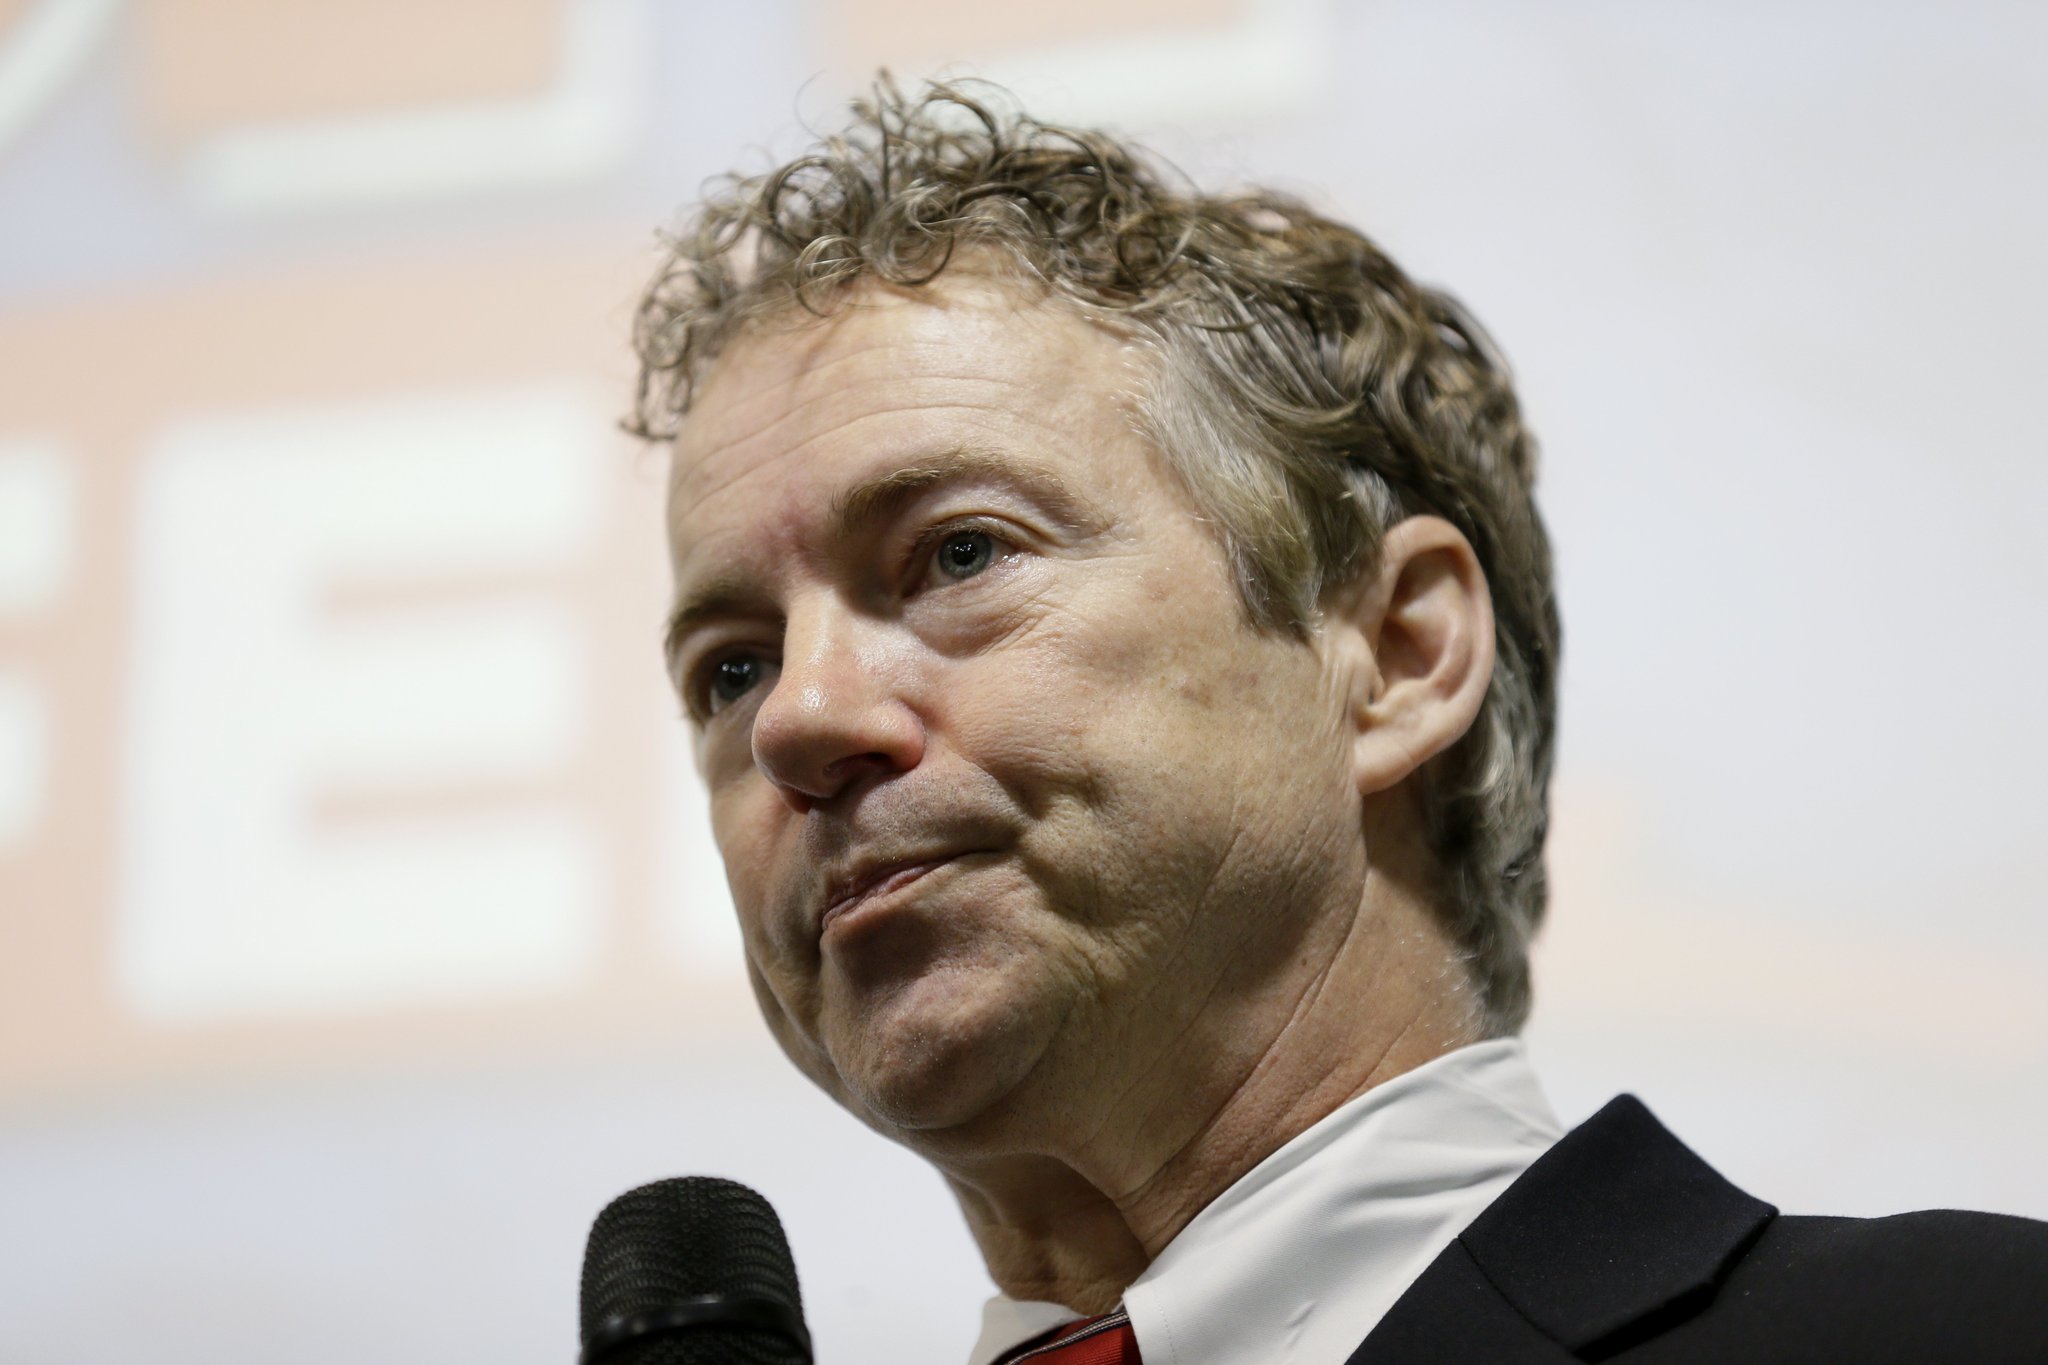 Rand Paul irritated by vaccine questions - LA Times